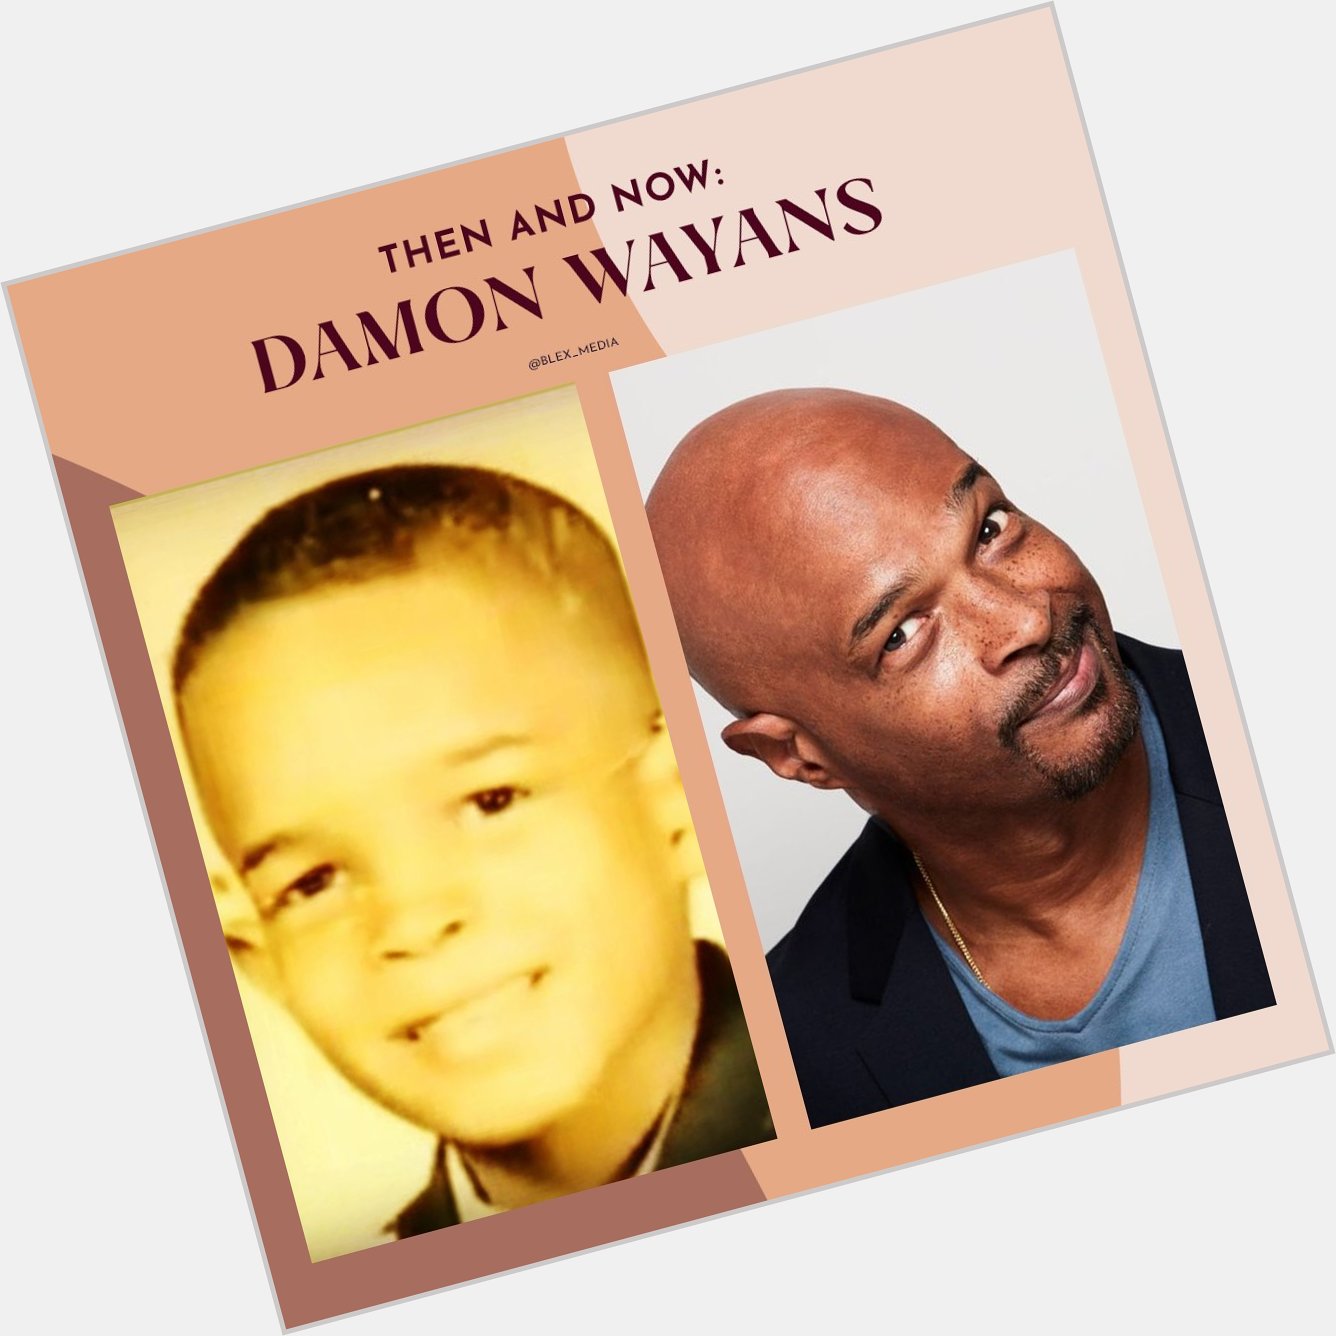 Happy Birthday Damon Wayans! What\s your favorite role of his...mine is hands down \"Major Payne.\" 